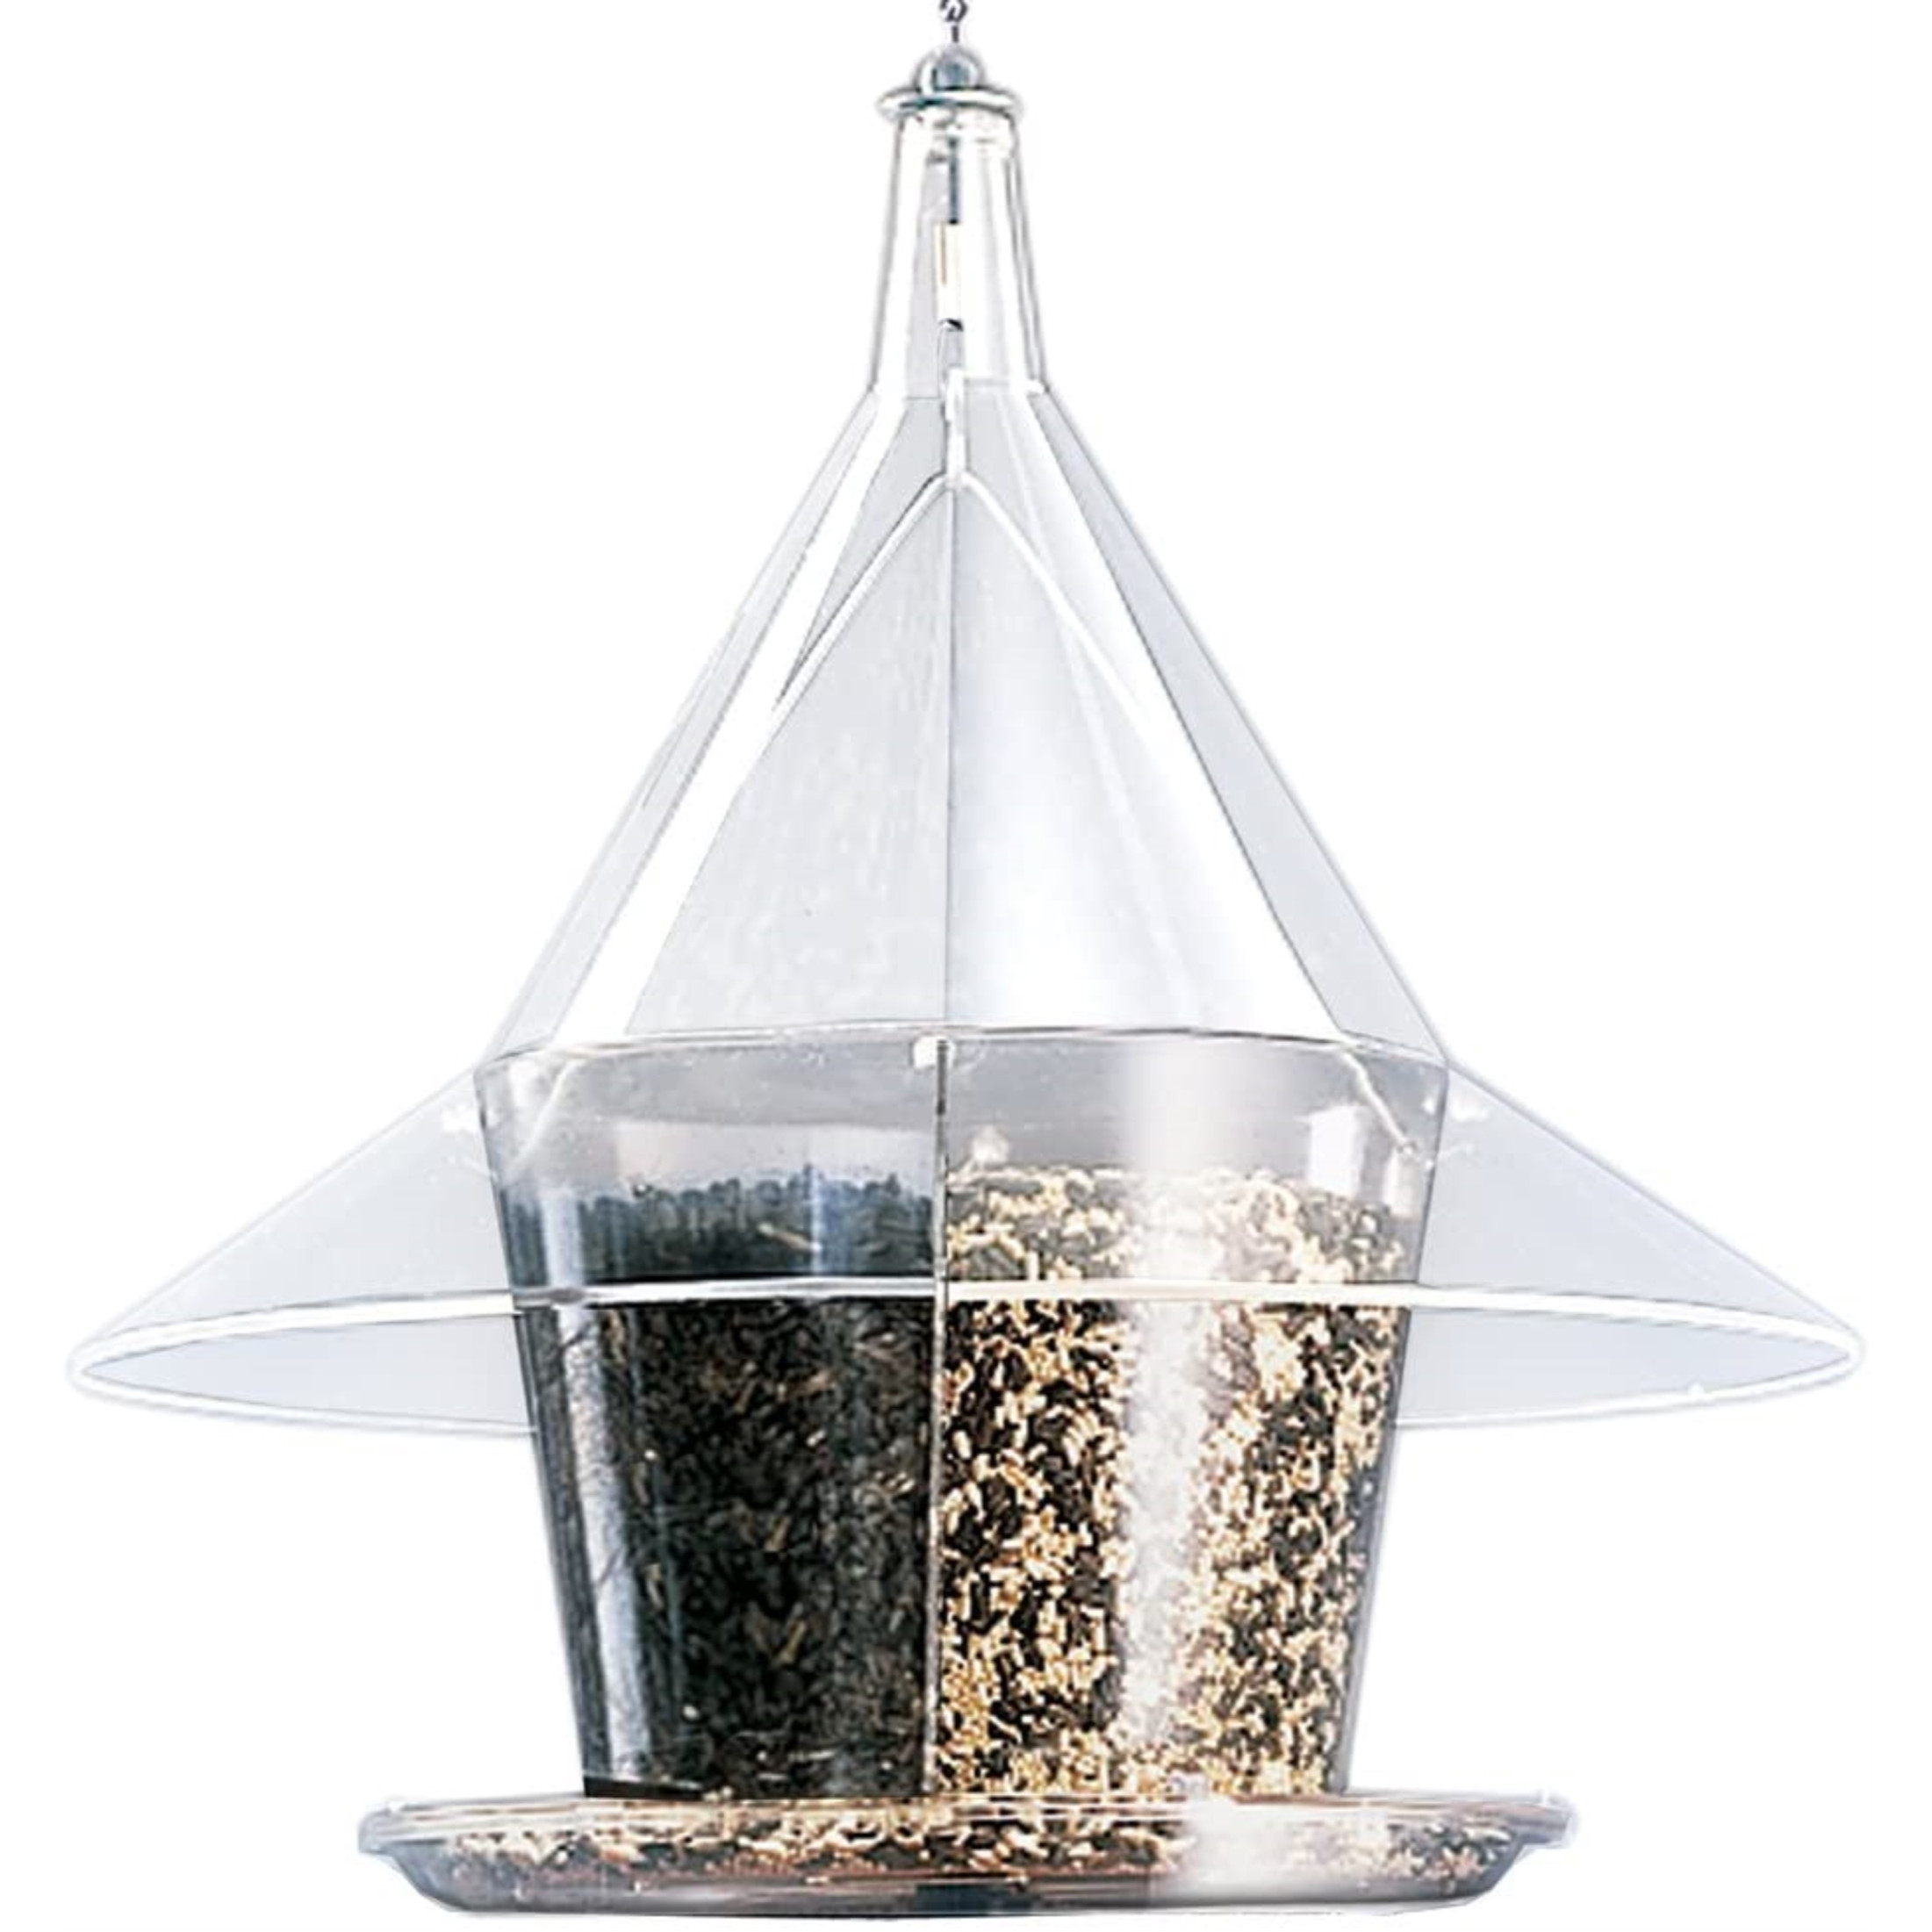 Arundale Products Sky Cafe Bird Feeder w/ Dividers, 28”H, 17" Baffle